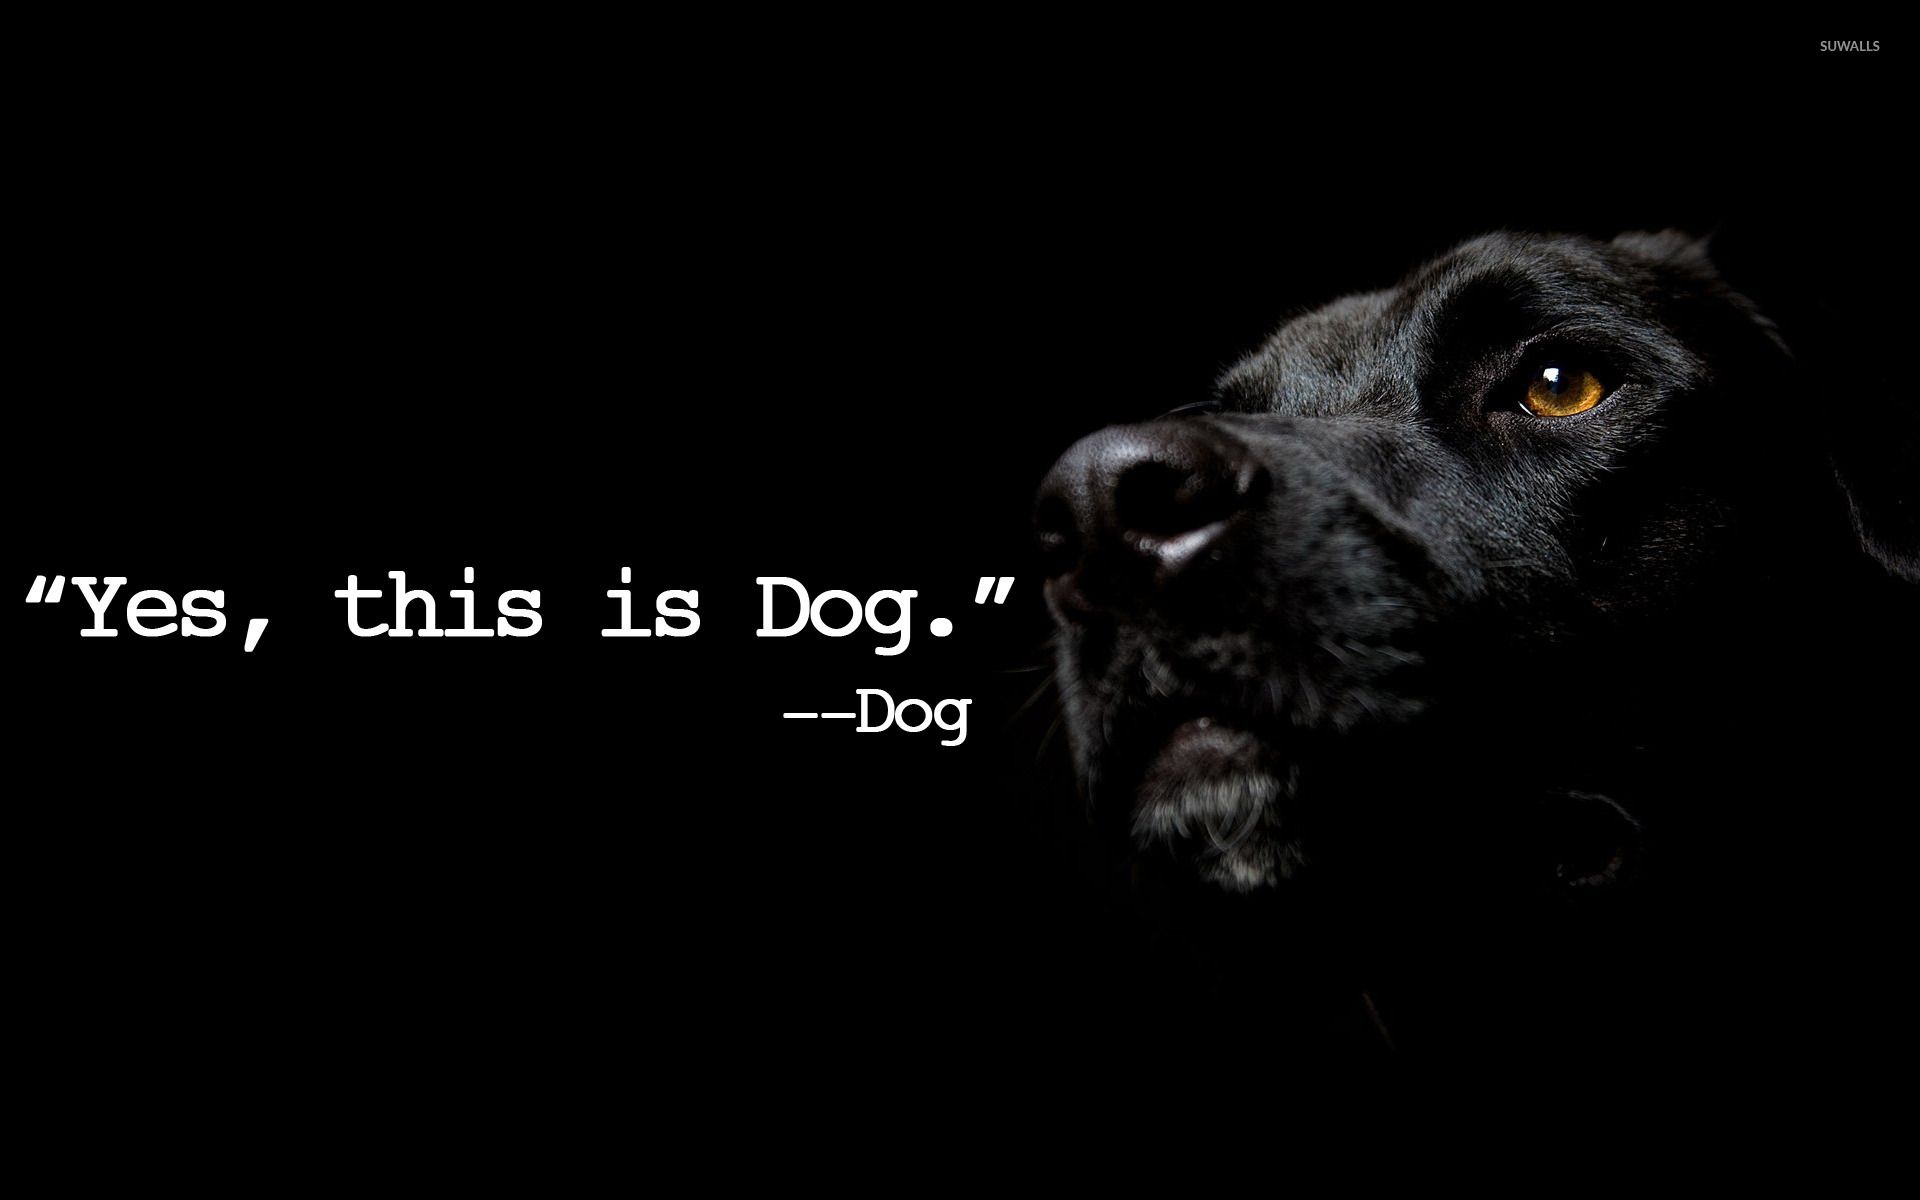 Yes, this is Dog wallpaper wallpaper